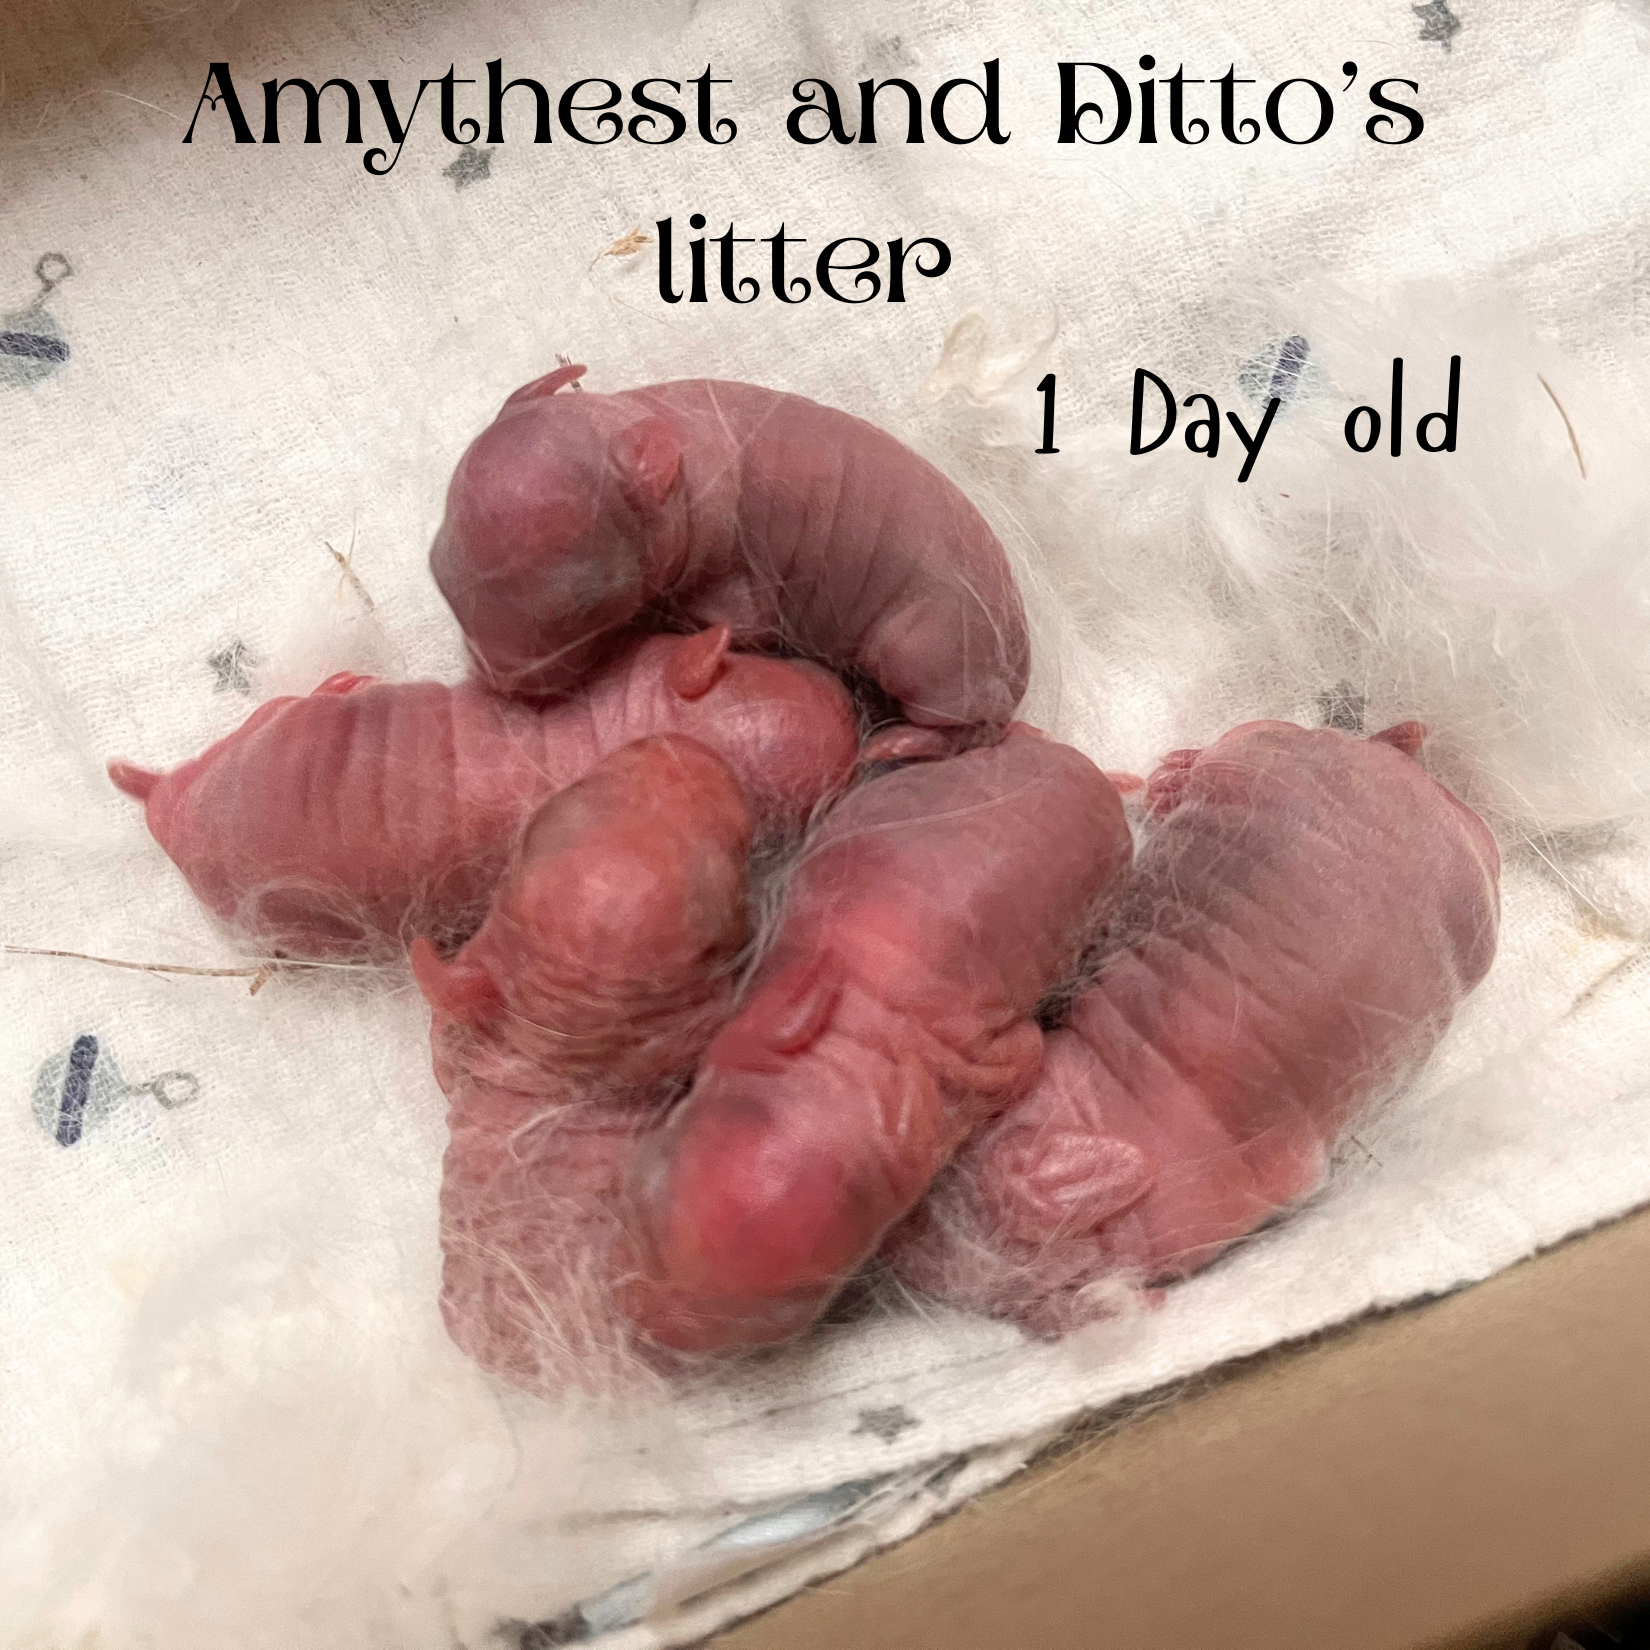 Amythest and ditto’s litter